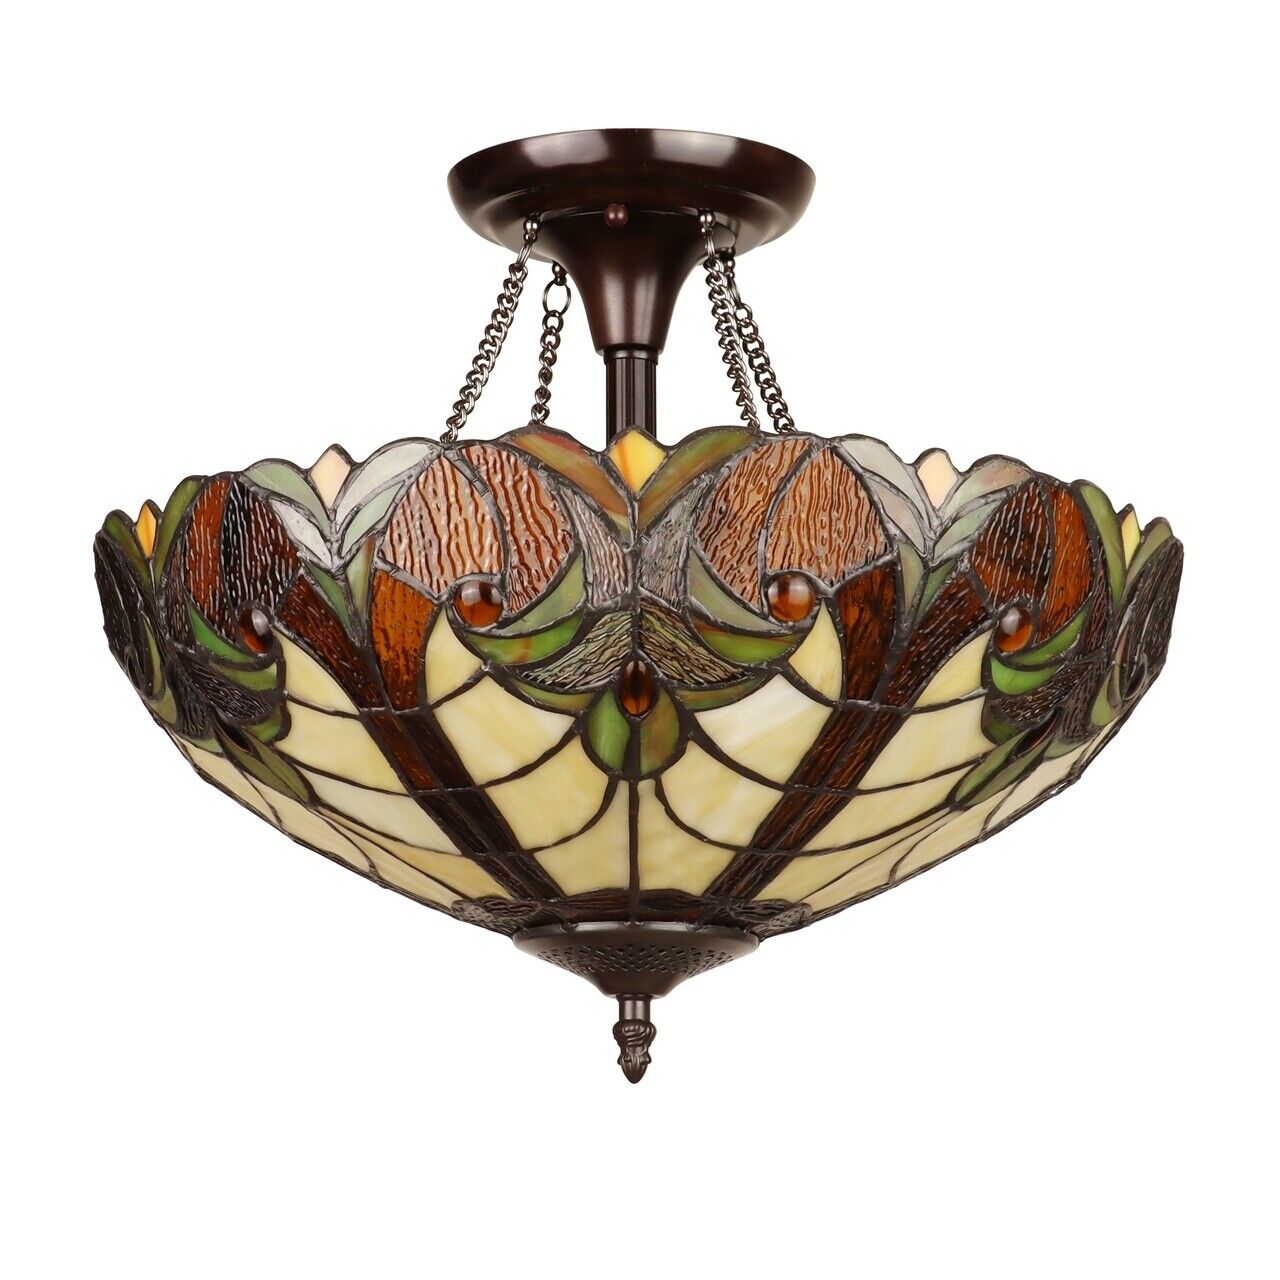 15.75" Antique Style Stained Glass Semi Flush Ceiling Uplight